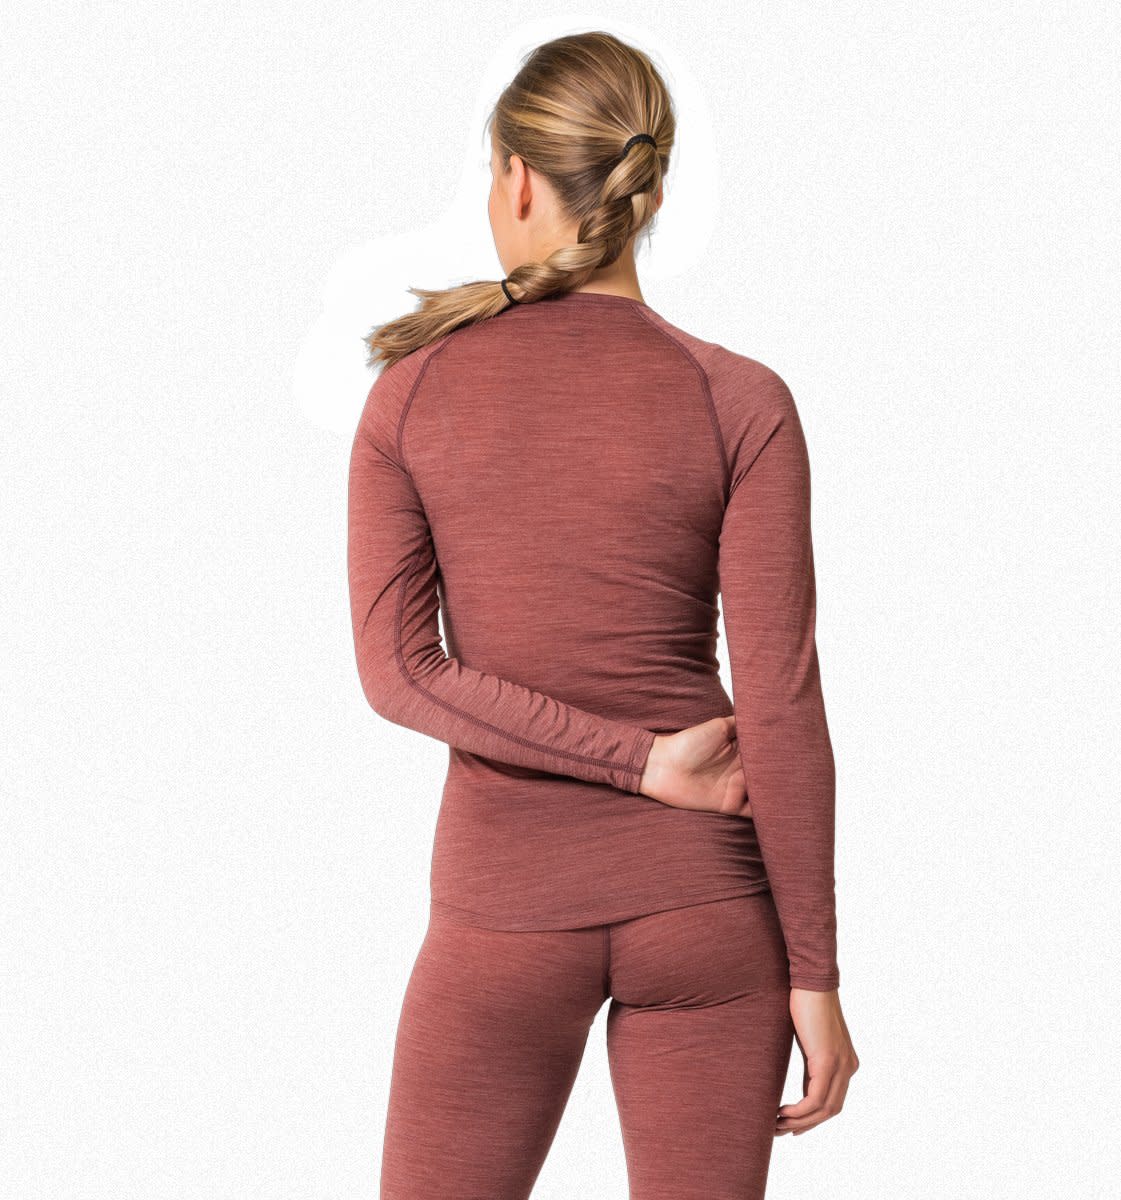 Thermal Underwear for Women in Organic Quality